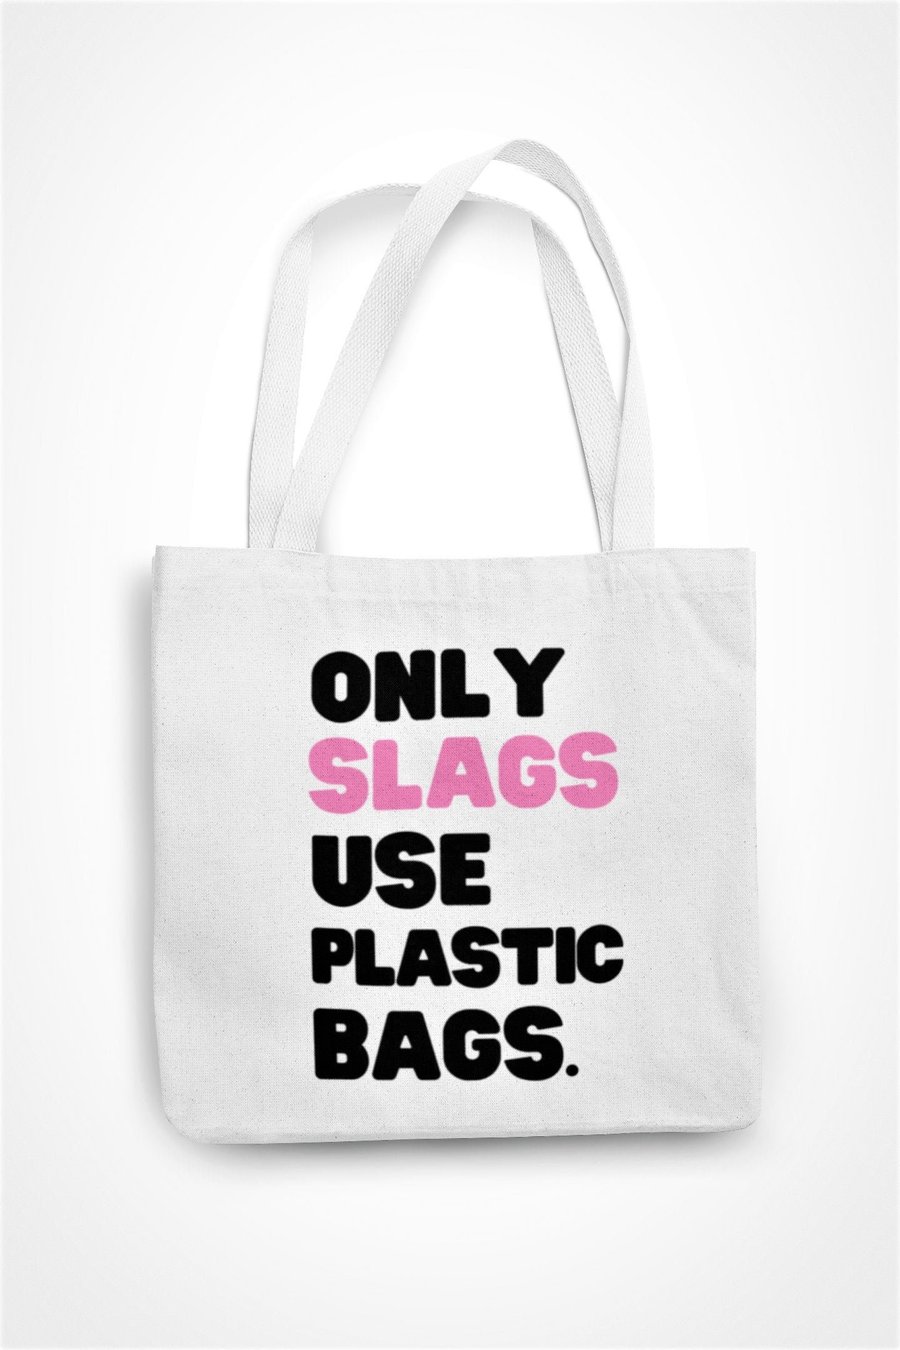 Only Slags Use Plastic Bags Hilarious Sassy Funny Rude Novelty Tote Bag